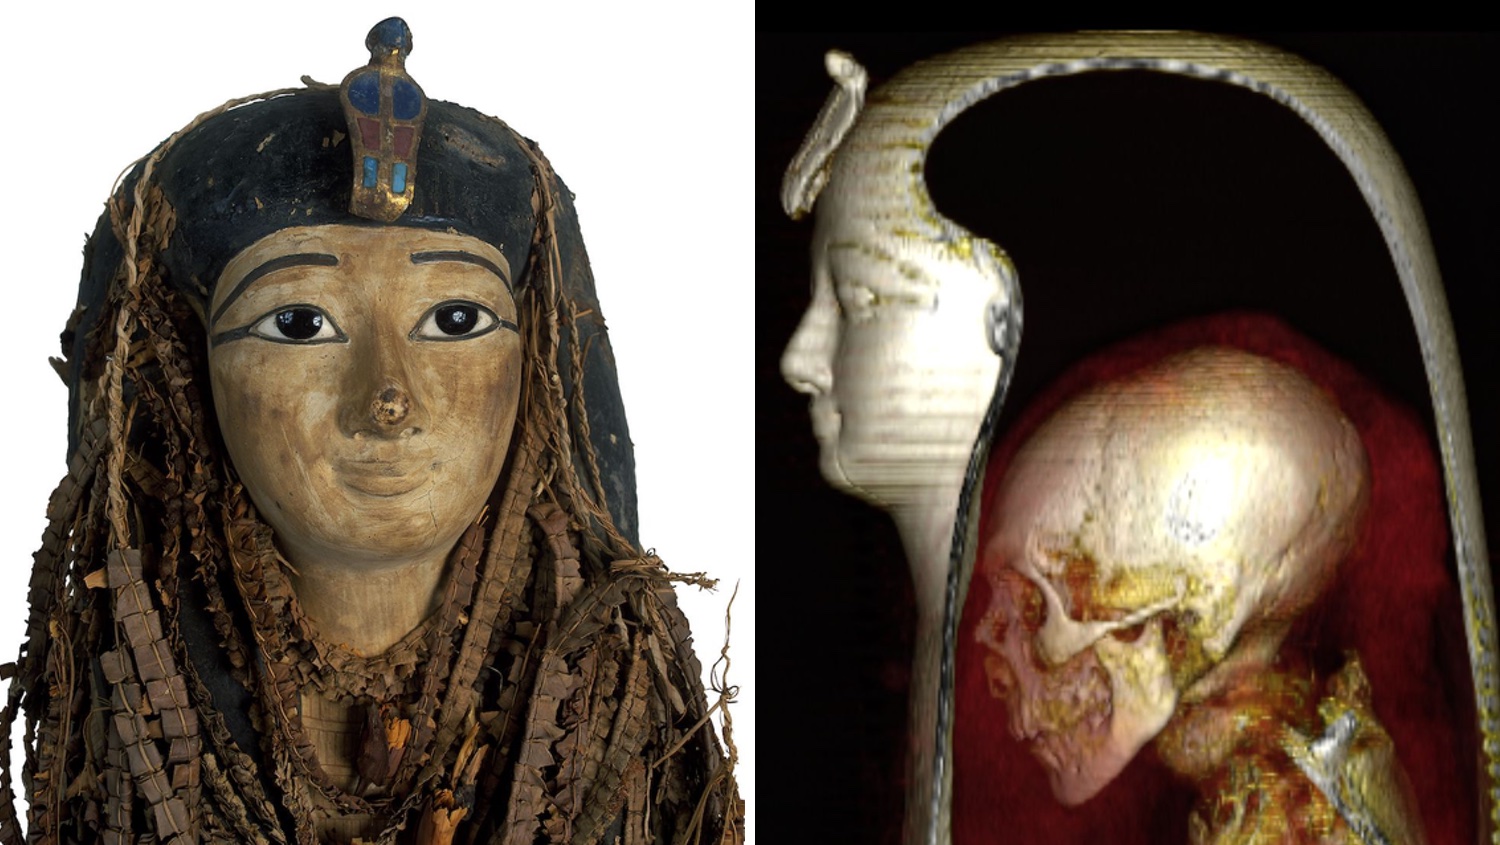 Mummy digitally 'unwrapped' by CT scan